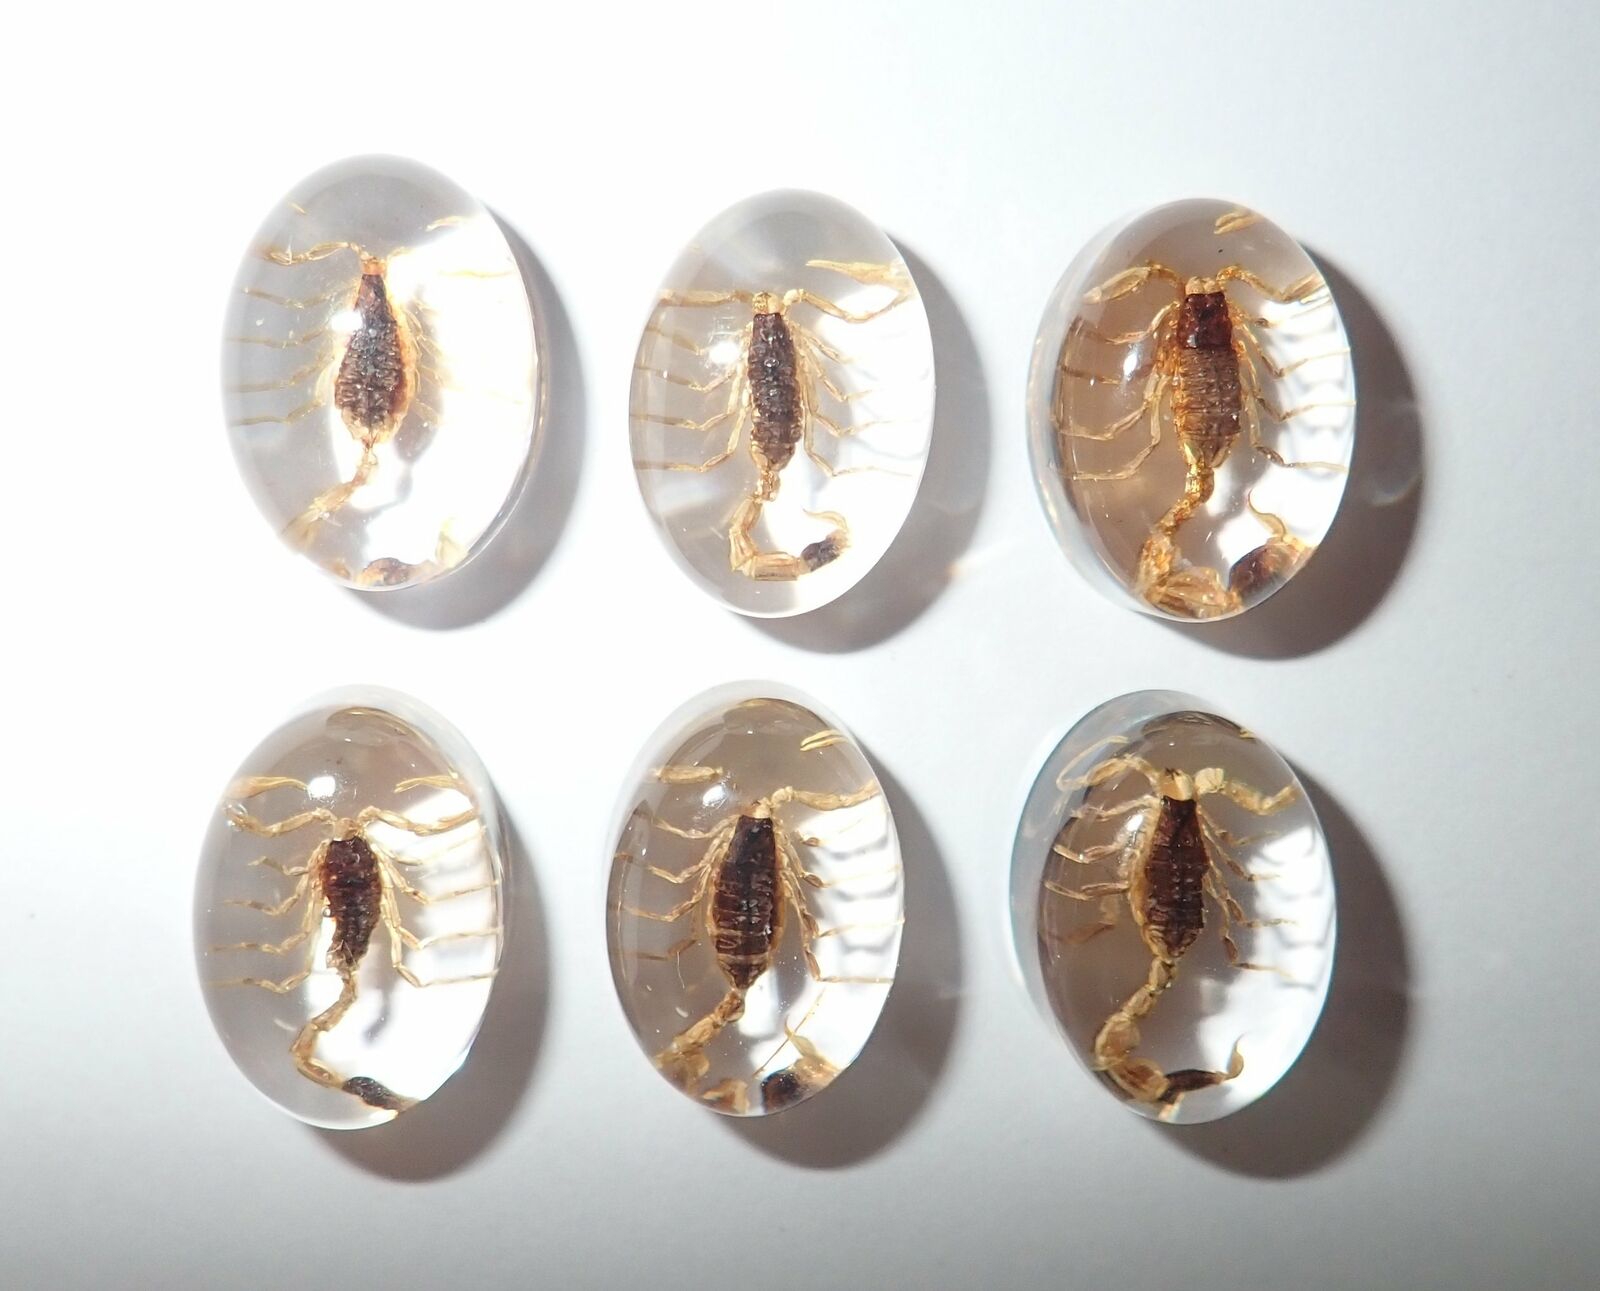 Insect Cabochon Golden Scorpion Oval 12x18 mm Clear 10 pieces Lot